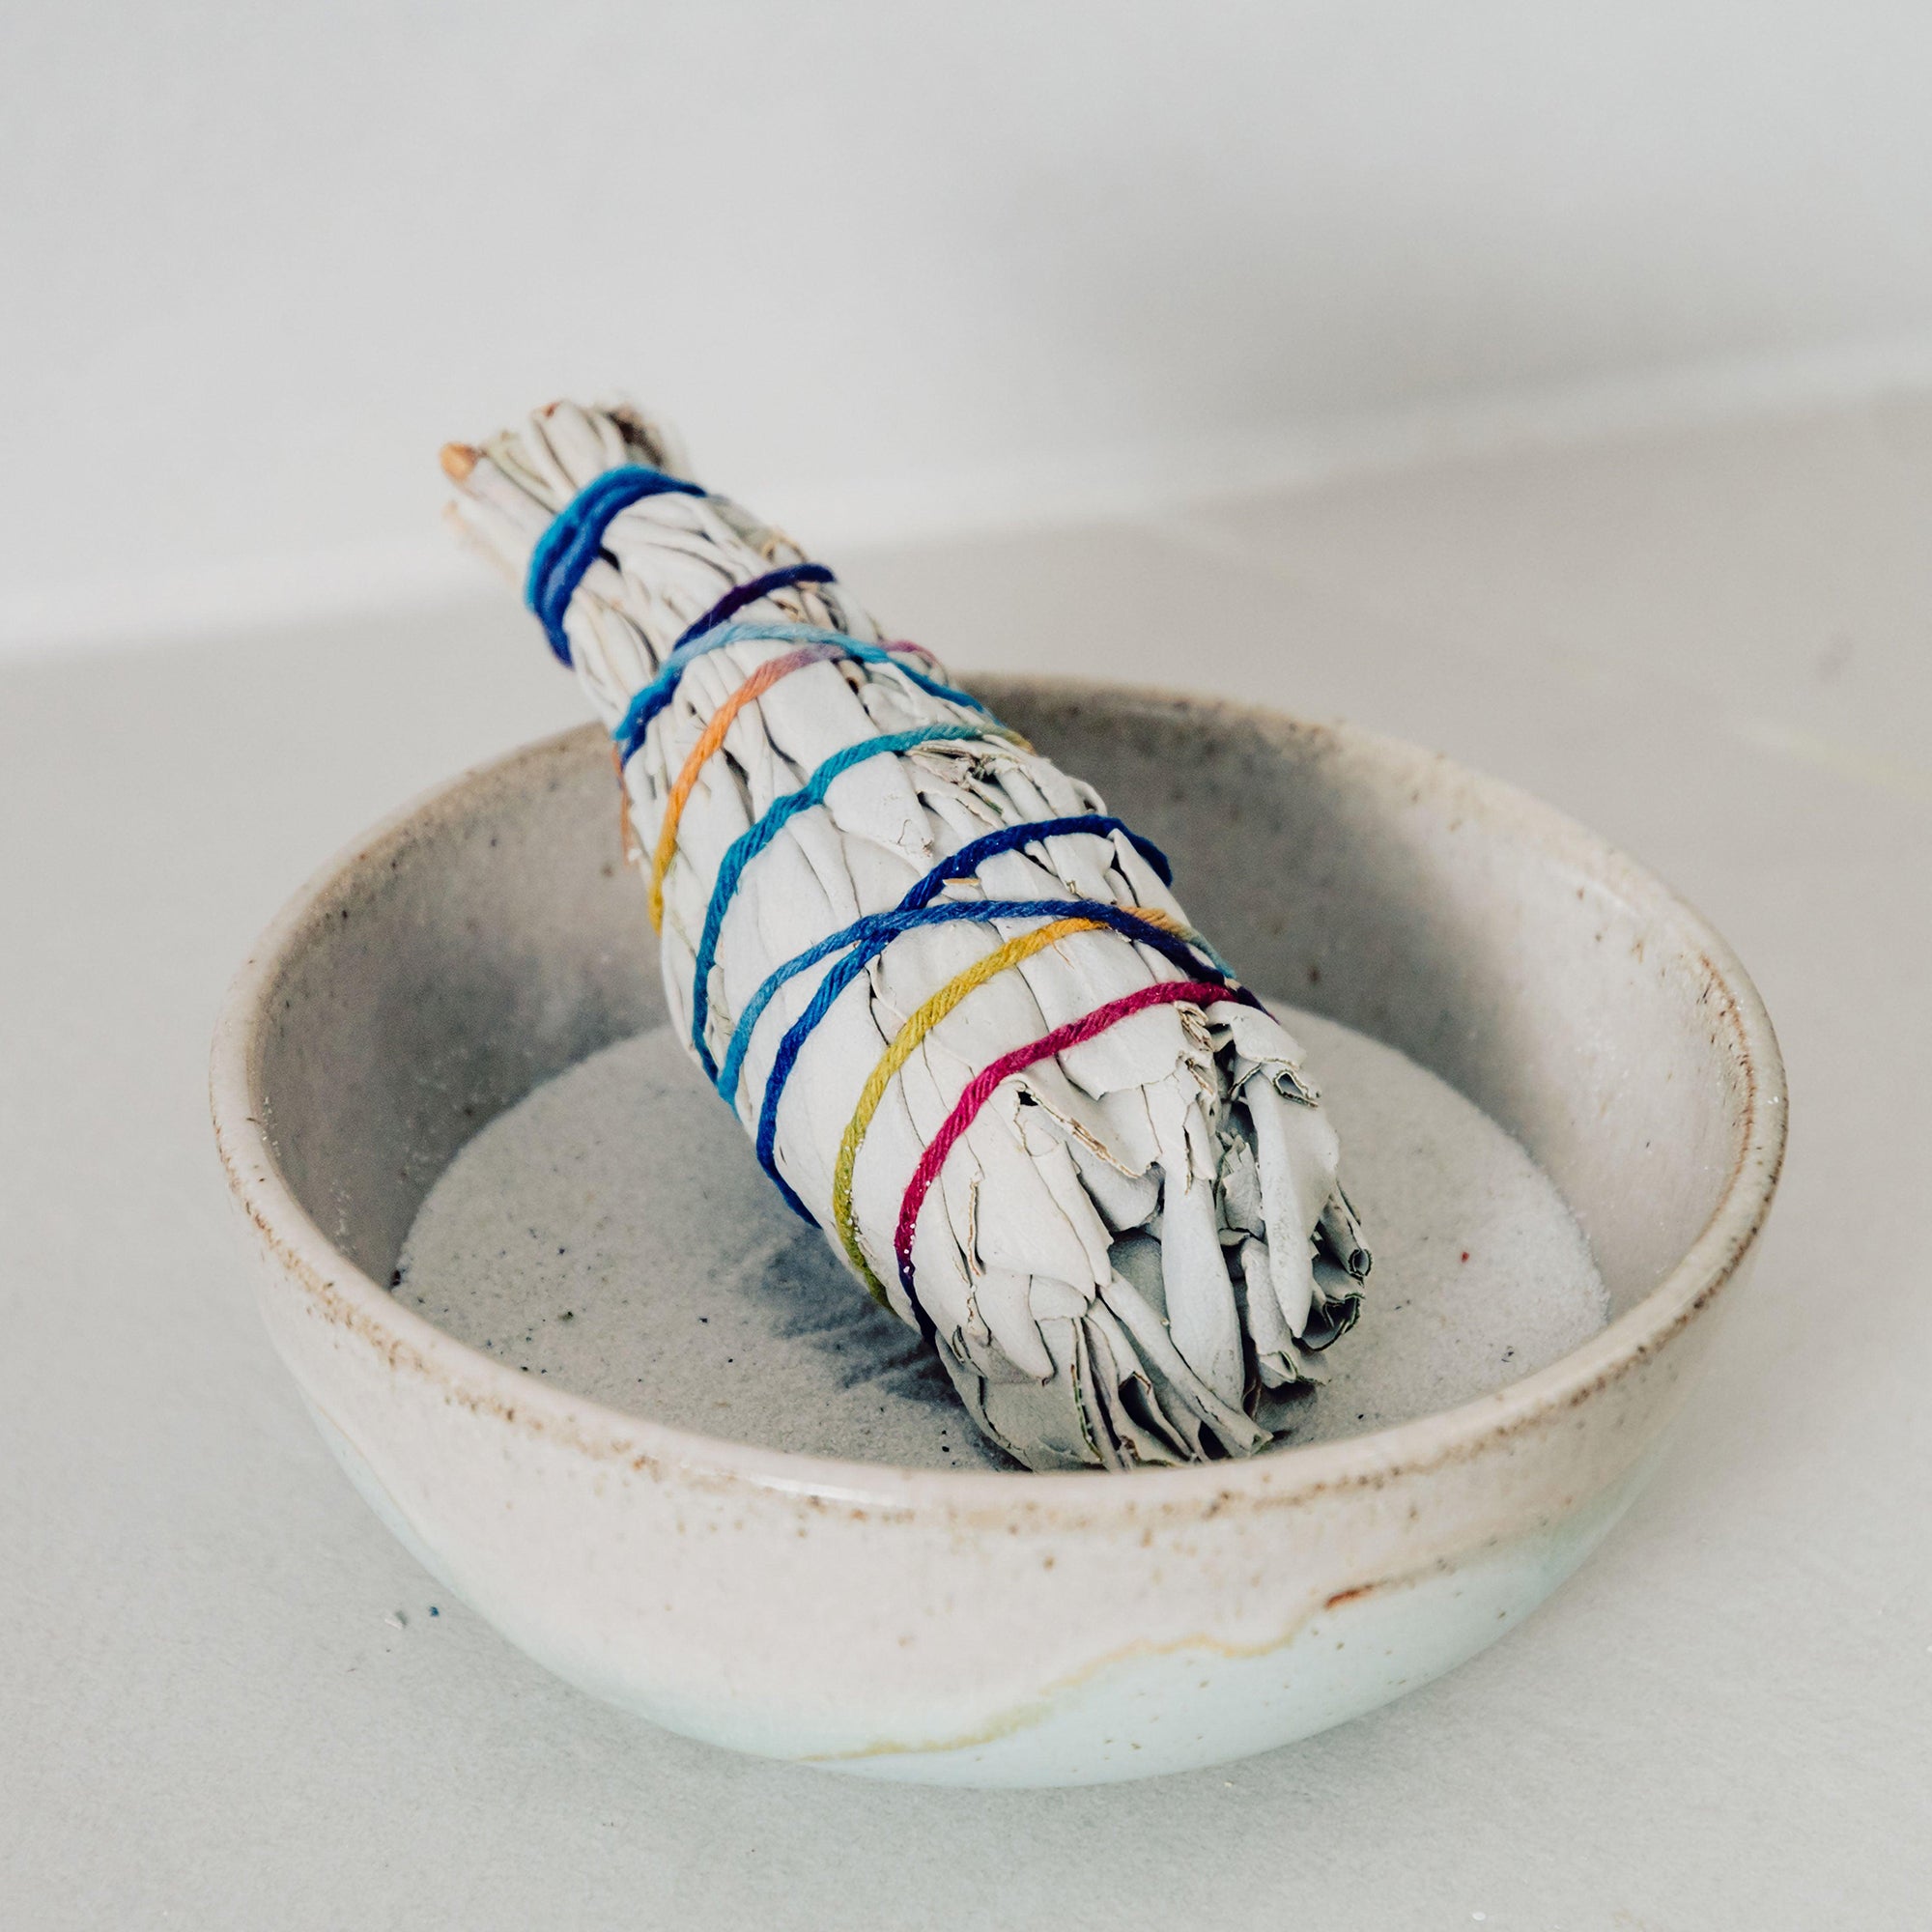 White sage smudge stick and smudging bowl with sand.